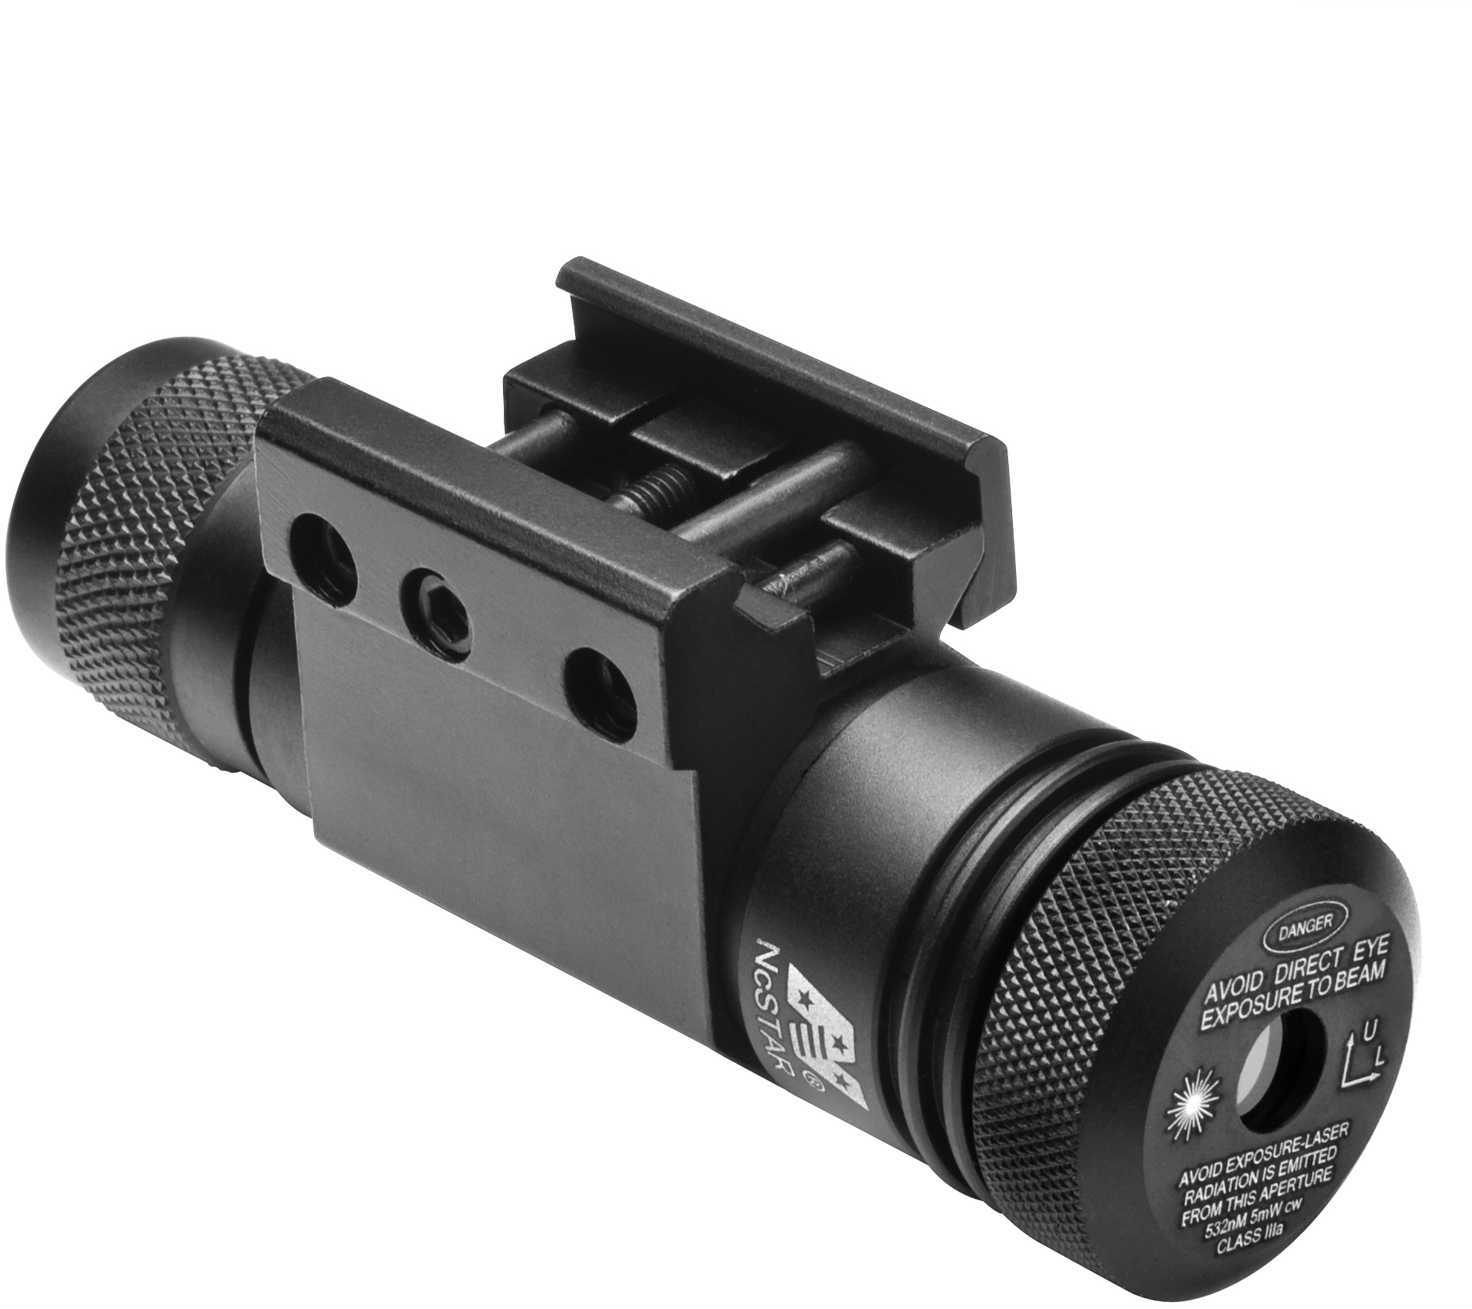 NCSTAR Compact Green Laser with Weaver Mount Fits Picatinny/Weaver Rail Black APRLSG